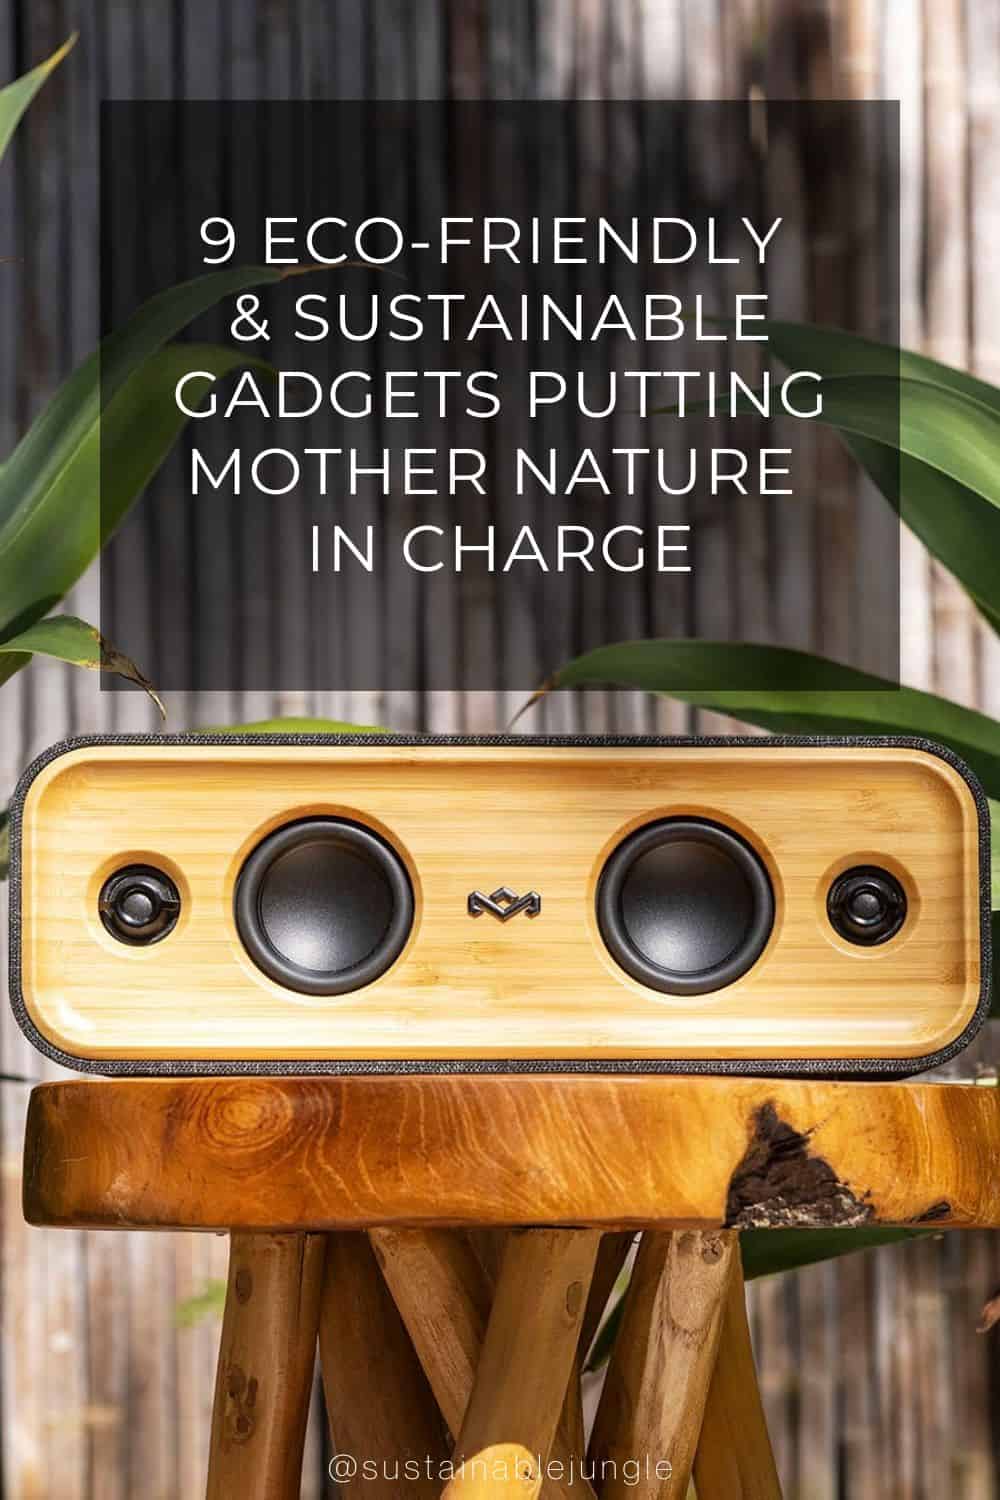 9 Eco-Friendly & Sustainable Gadgets Putting Mother Nature In Charge Image by House Of Marley #sustainablegadgets #ecofriendlygadgets #greenergadgets #greenhomegadgets #sustainablenergygadgets #ecogadgets #sustainablejungle